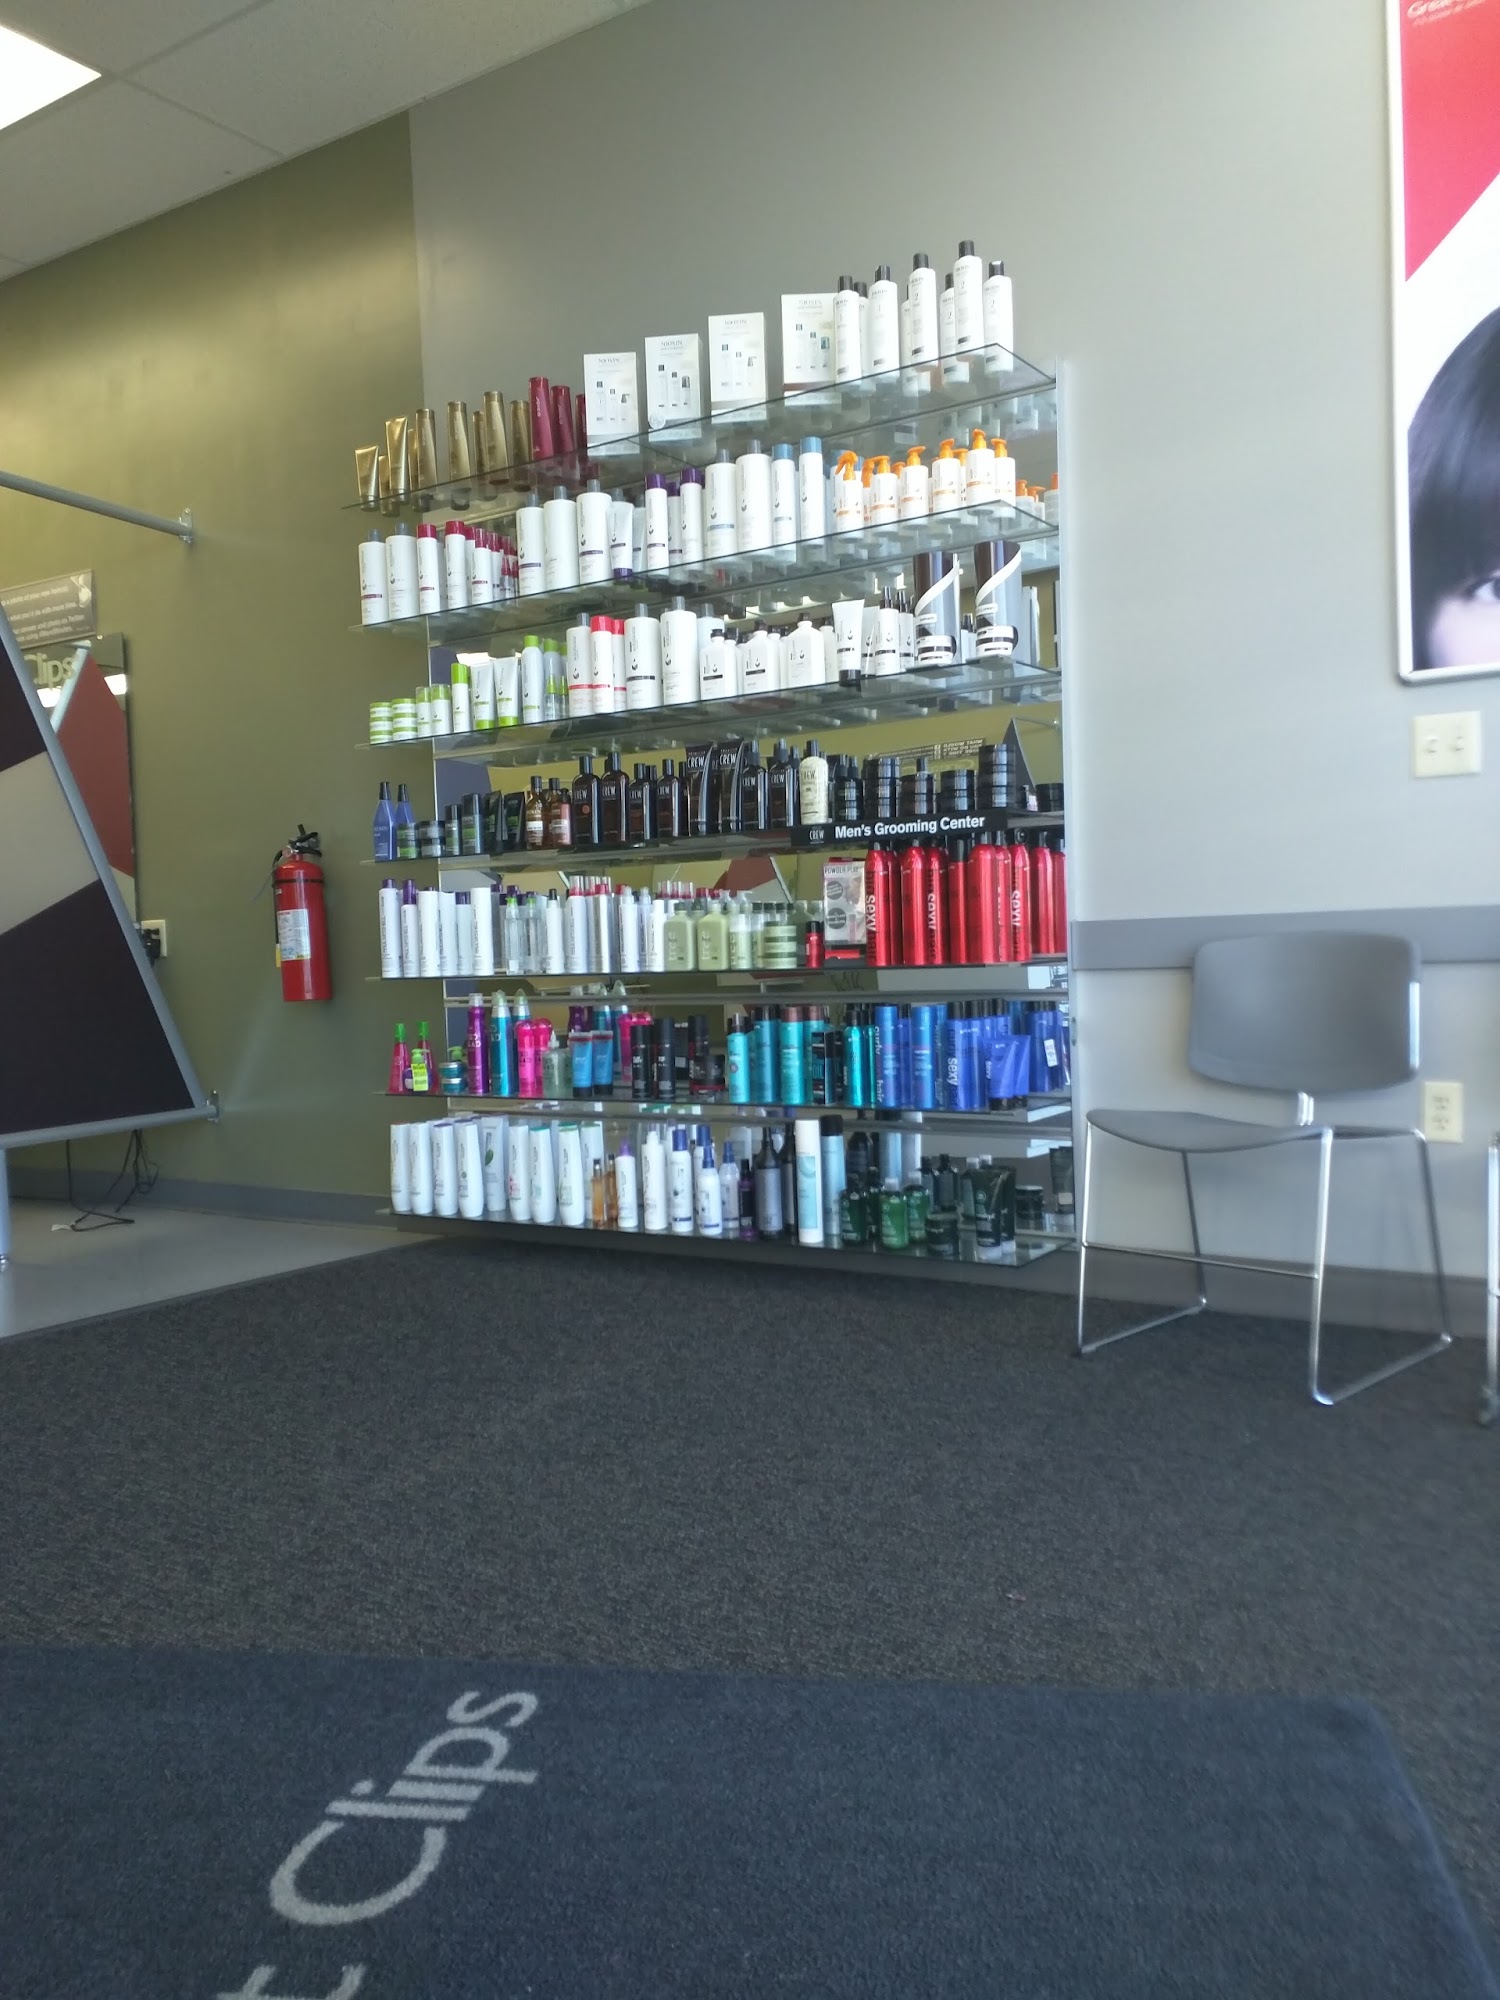 Great Clips 118 8th St, Monroe Wisconsin 53566